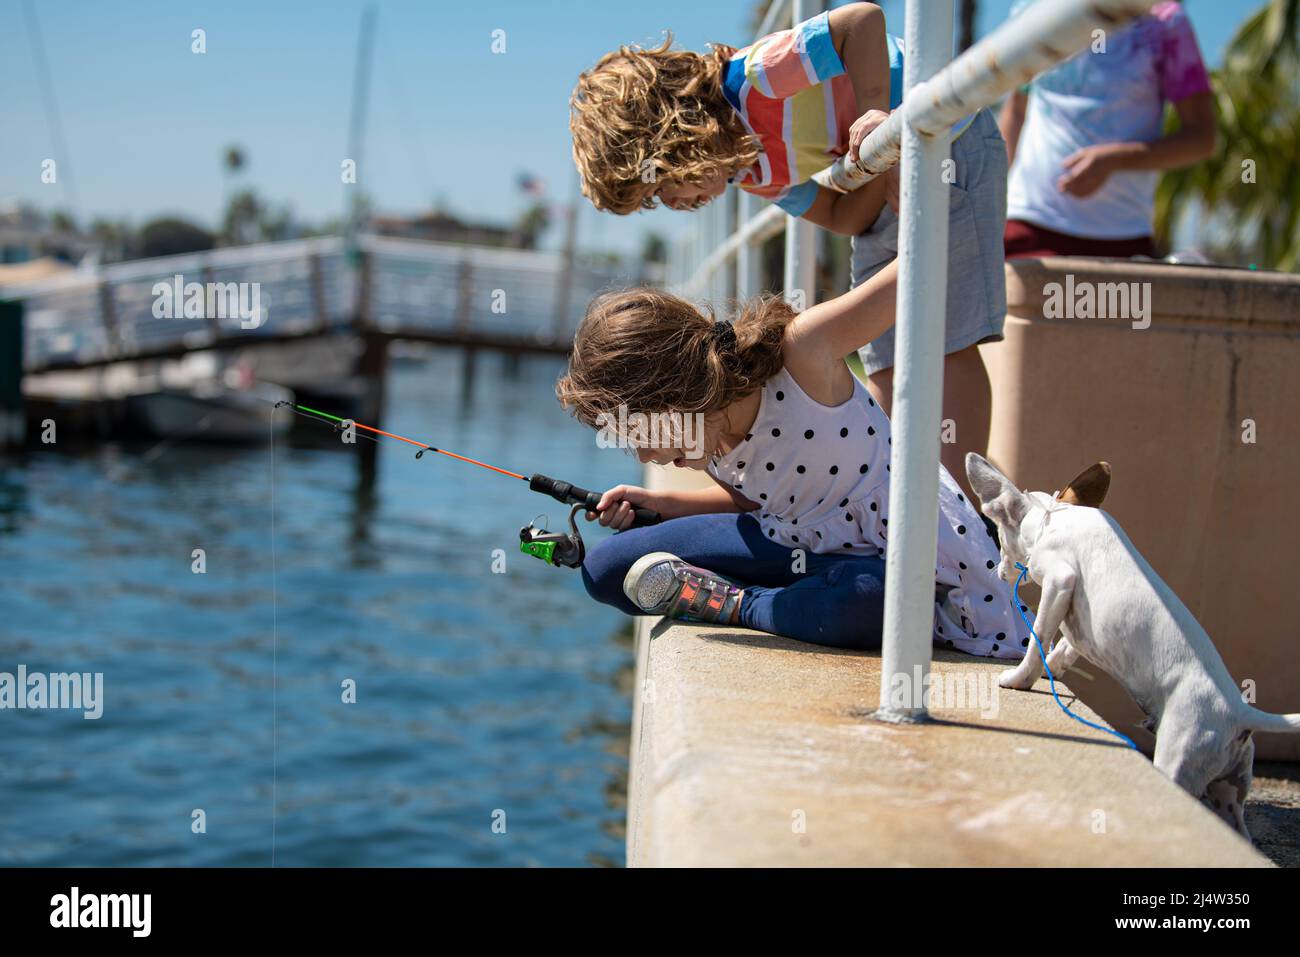 https://c8.alamy.com/comp/2J4W350/kids-boy-and-girl-friends-fishing-on-weekend-two-kids-boy-and-girl-fishing-in-a-river-or-lake-happy-children-friends-fishing-together-near-the-pond-2J4W350.jpg